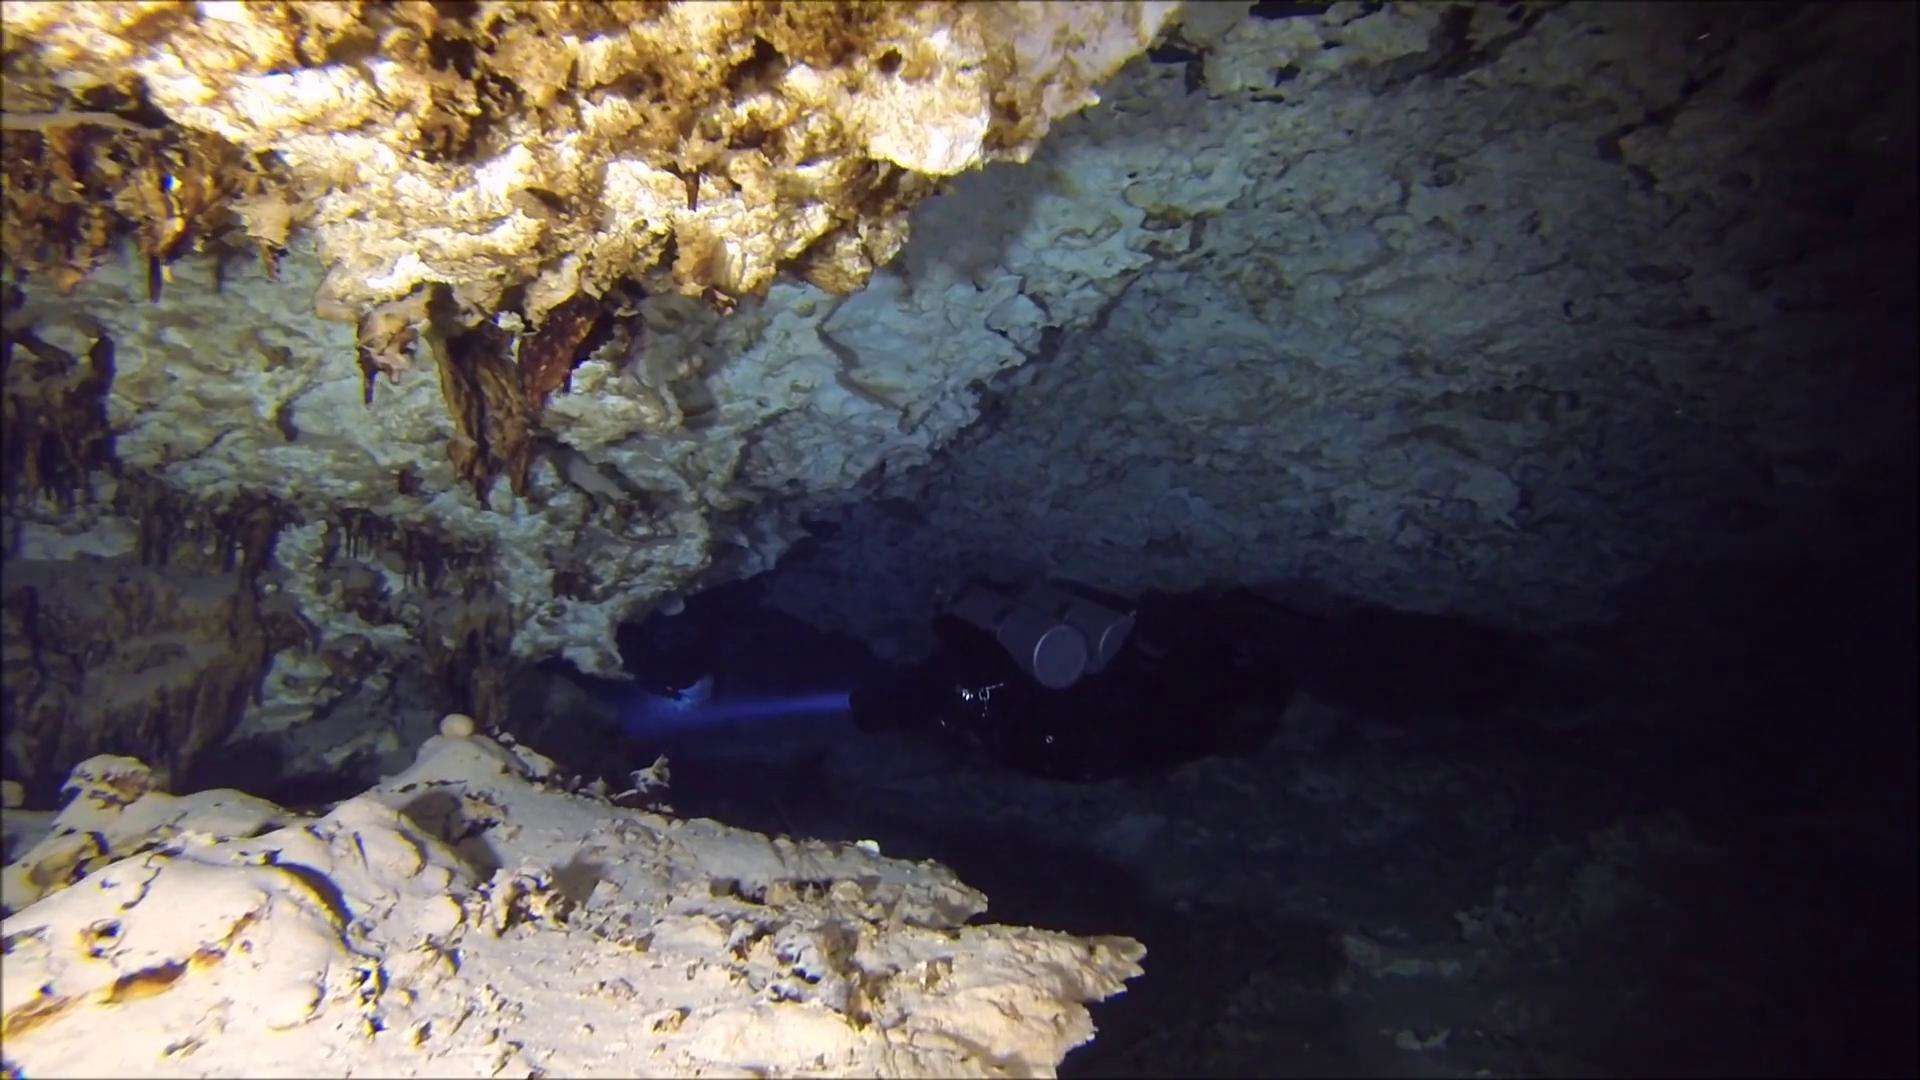 FUll Cave Diver Course